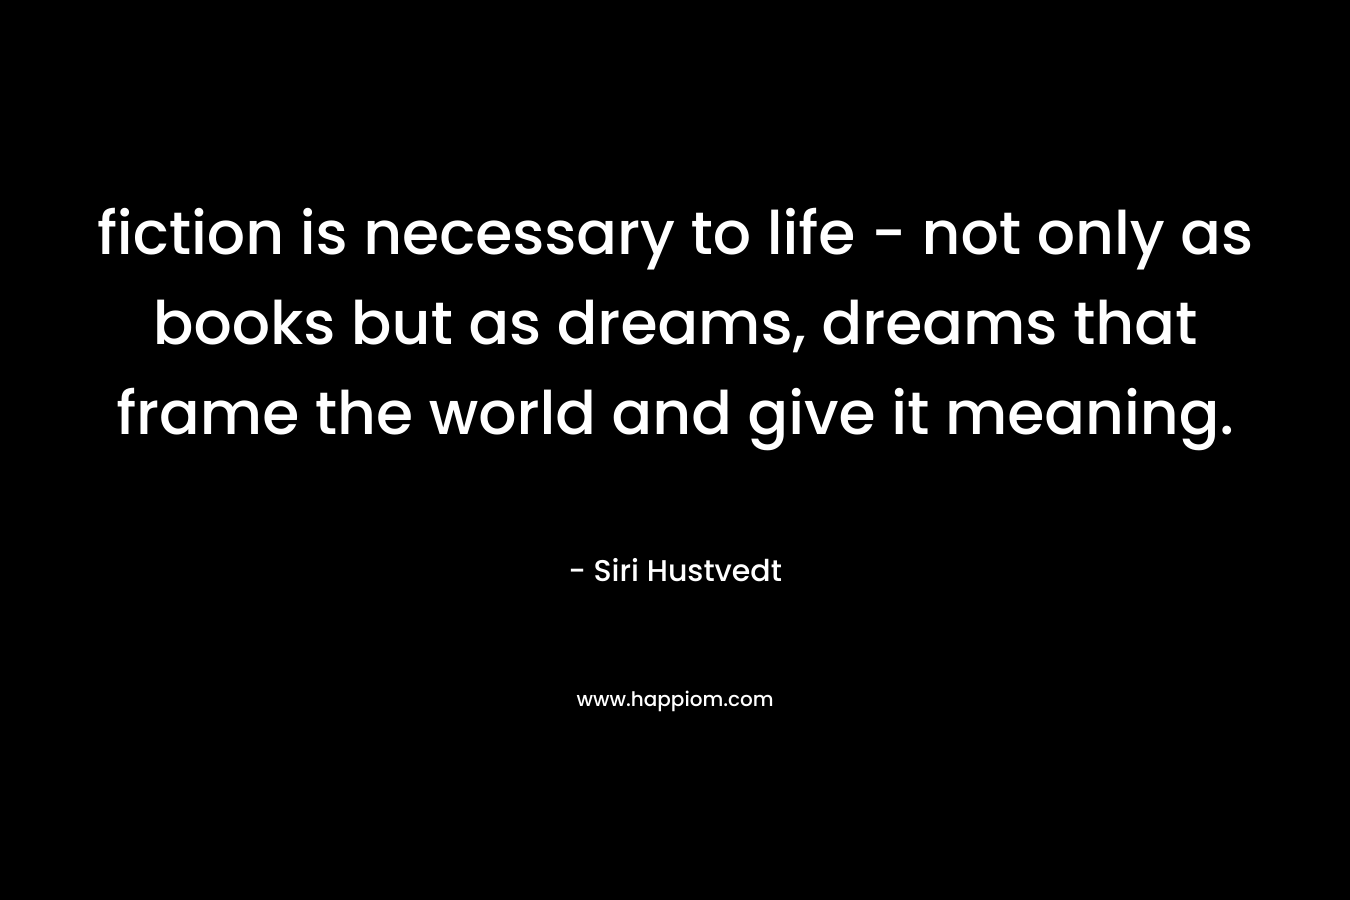 fiction is necessary to life - not only as books but as dreams, dreams that frame the world and give it meaning.